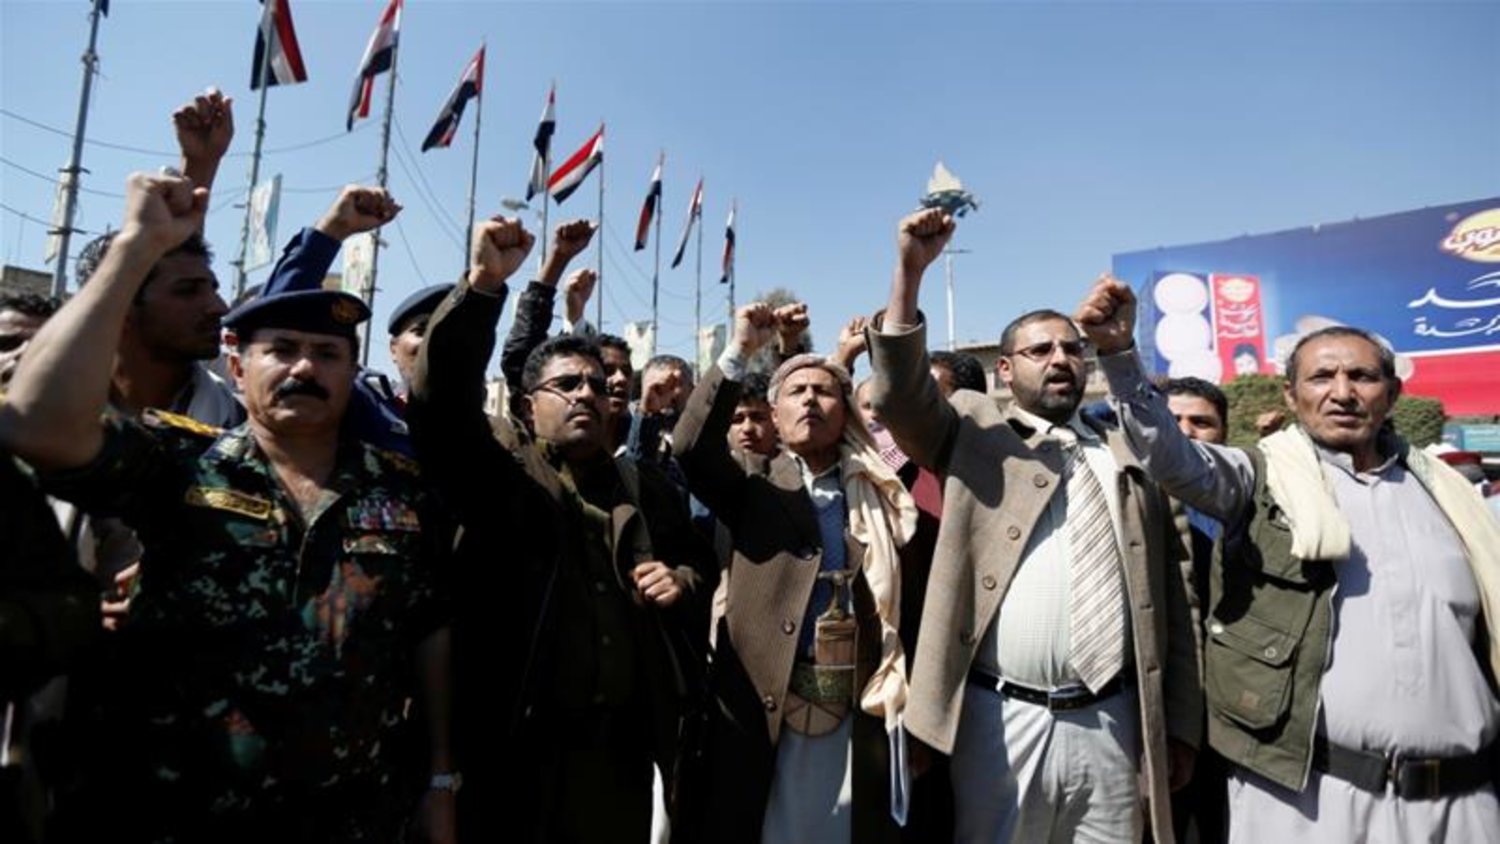 Houthi followers shout slogans during a gathering in Sanaa this week to celebrate their advances on forces loyal to former President Ali Abdullah Saleh [File Photo: Khaled Abdullah/Reuters]
